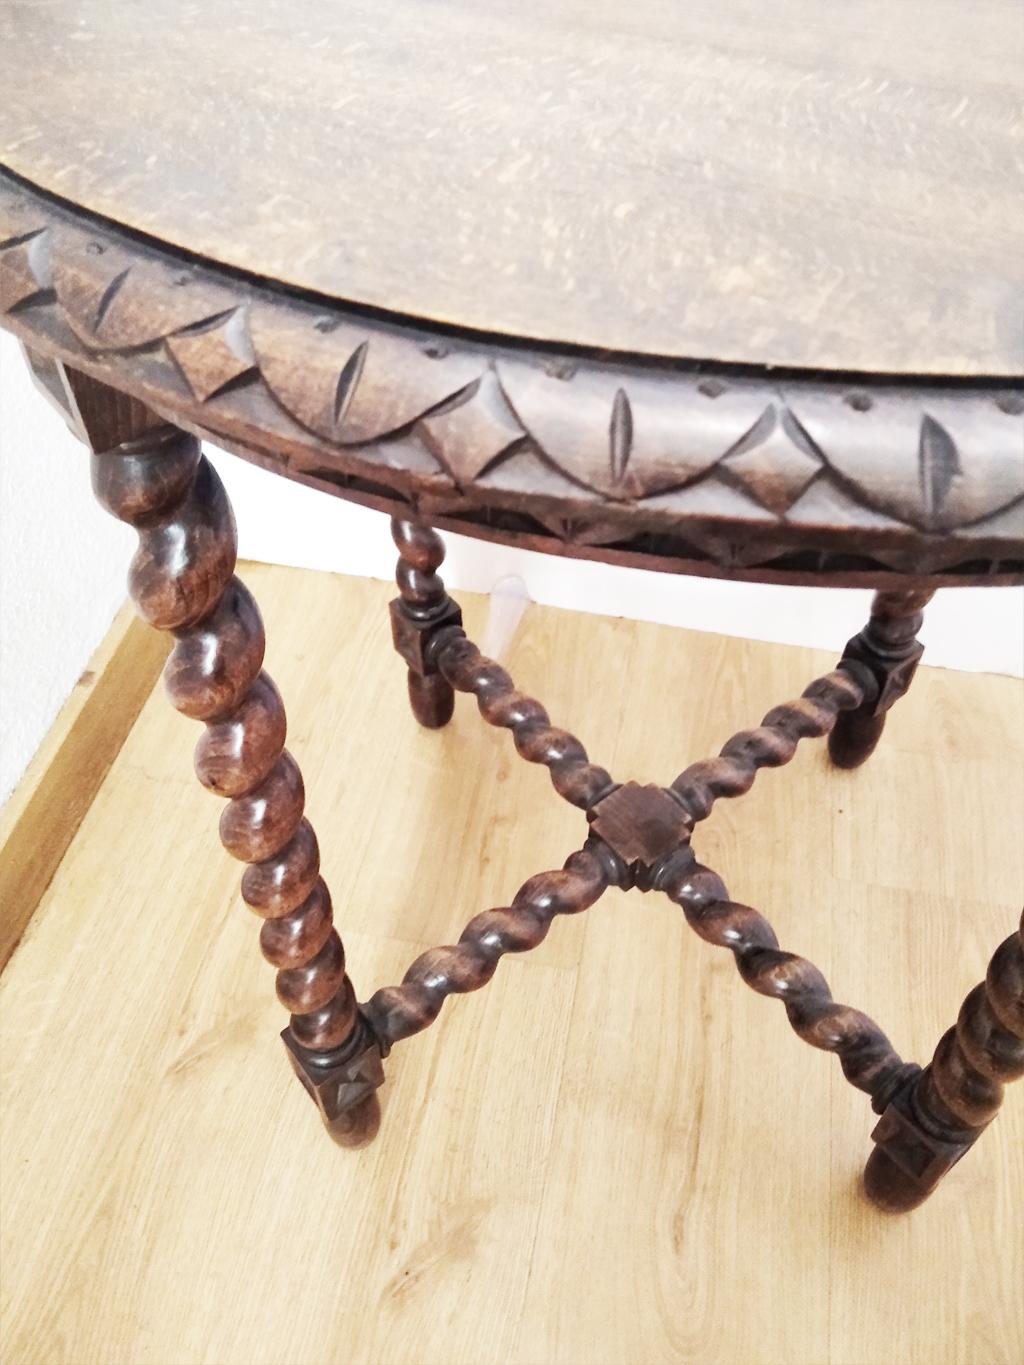 Renaissance Revival Table Large Round Side or Center Barley Twist Legs, 19thor 18th  Century Spain